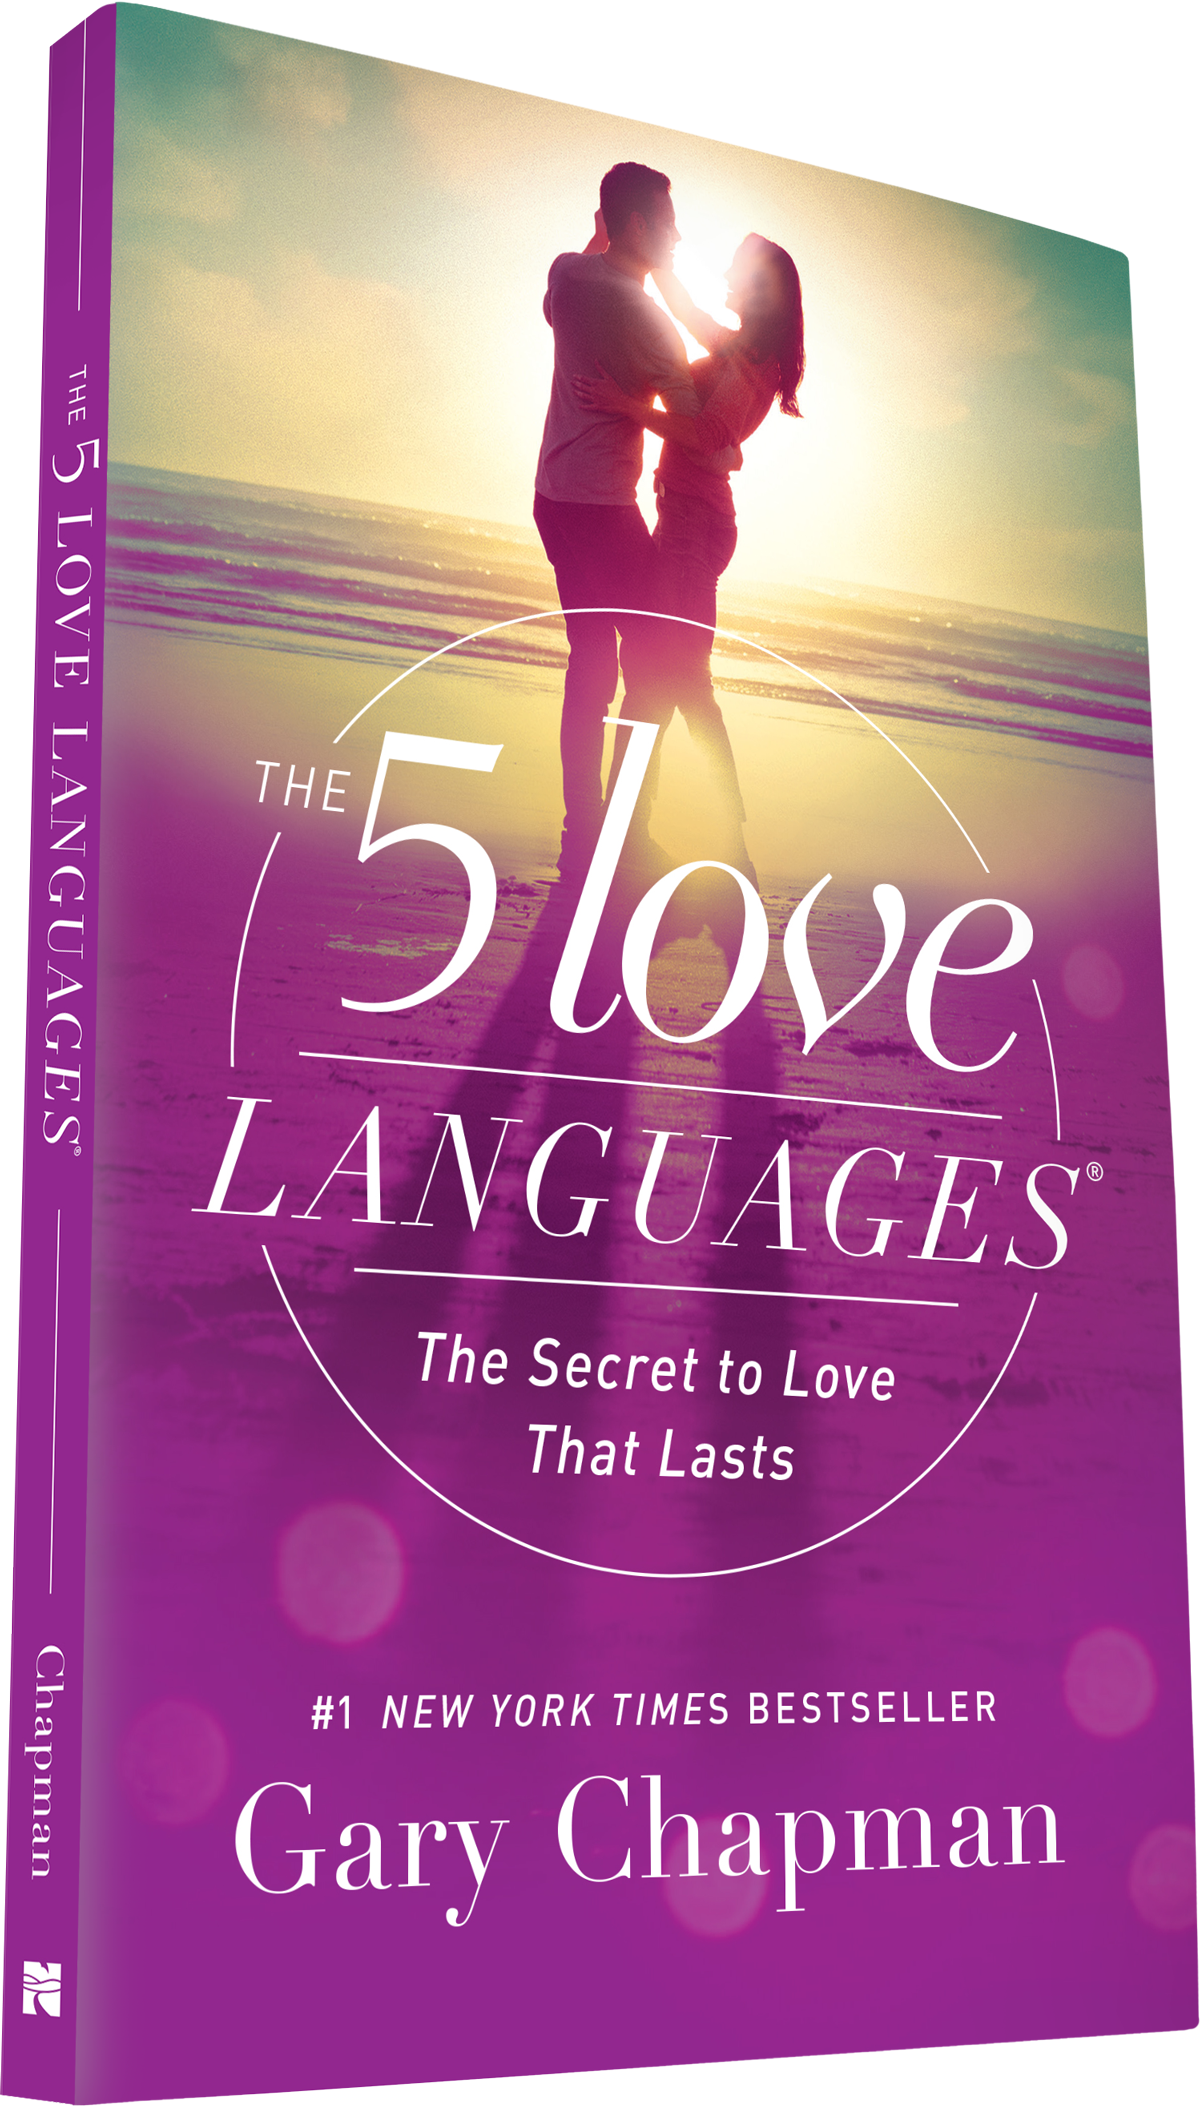 Love the languages pdf five Download The